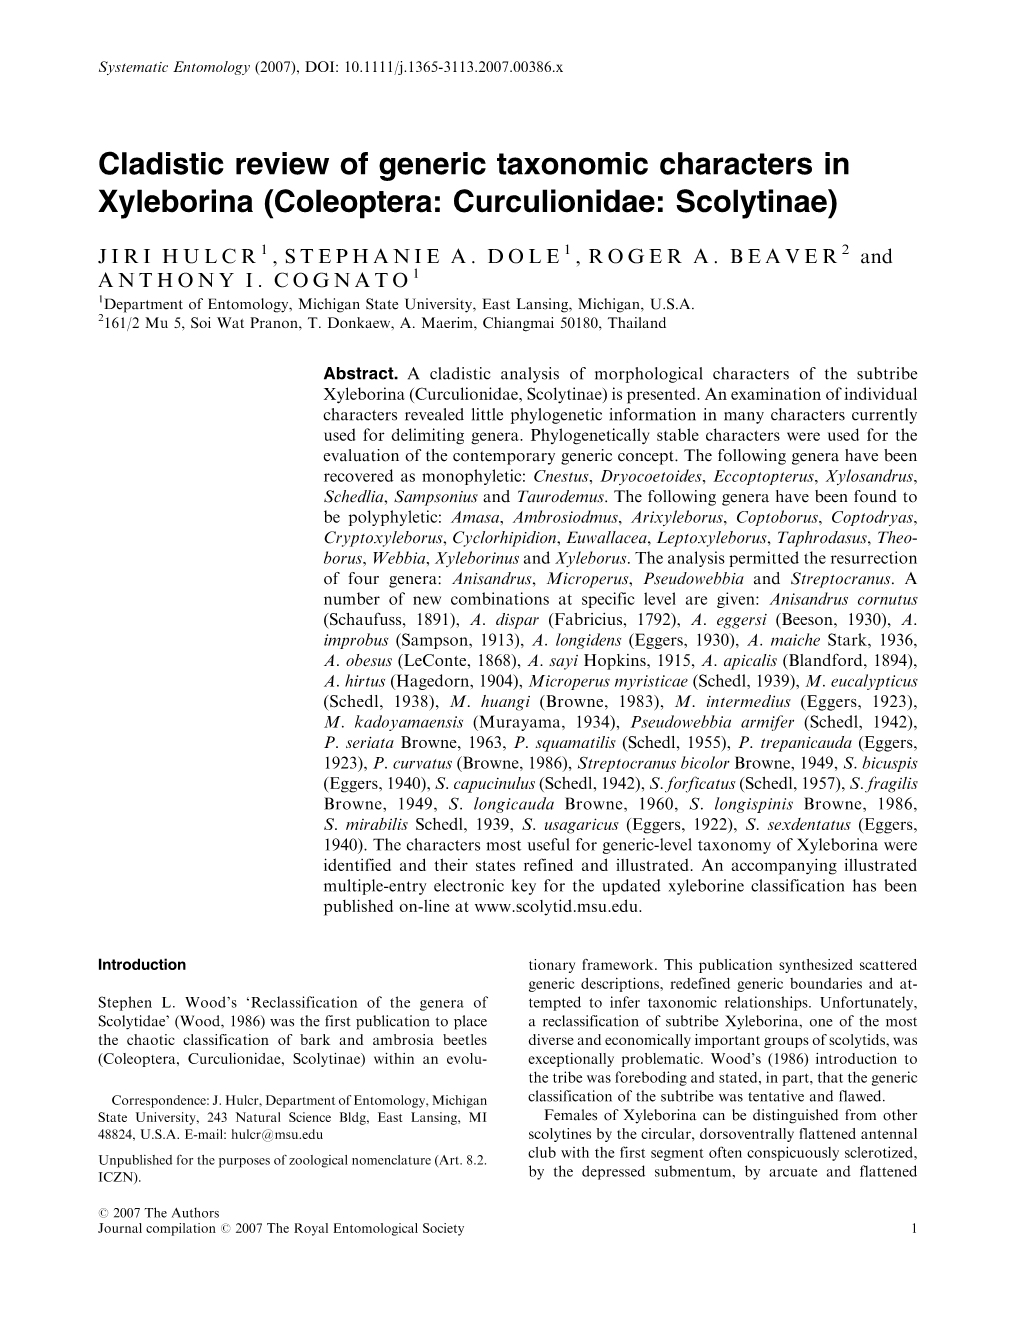 Cladistic Review of Generic Taxonomic Characters in Xyleborina (Coleoptera: Curculionidae: Scolytinae)